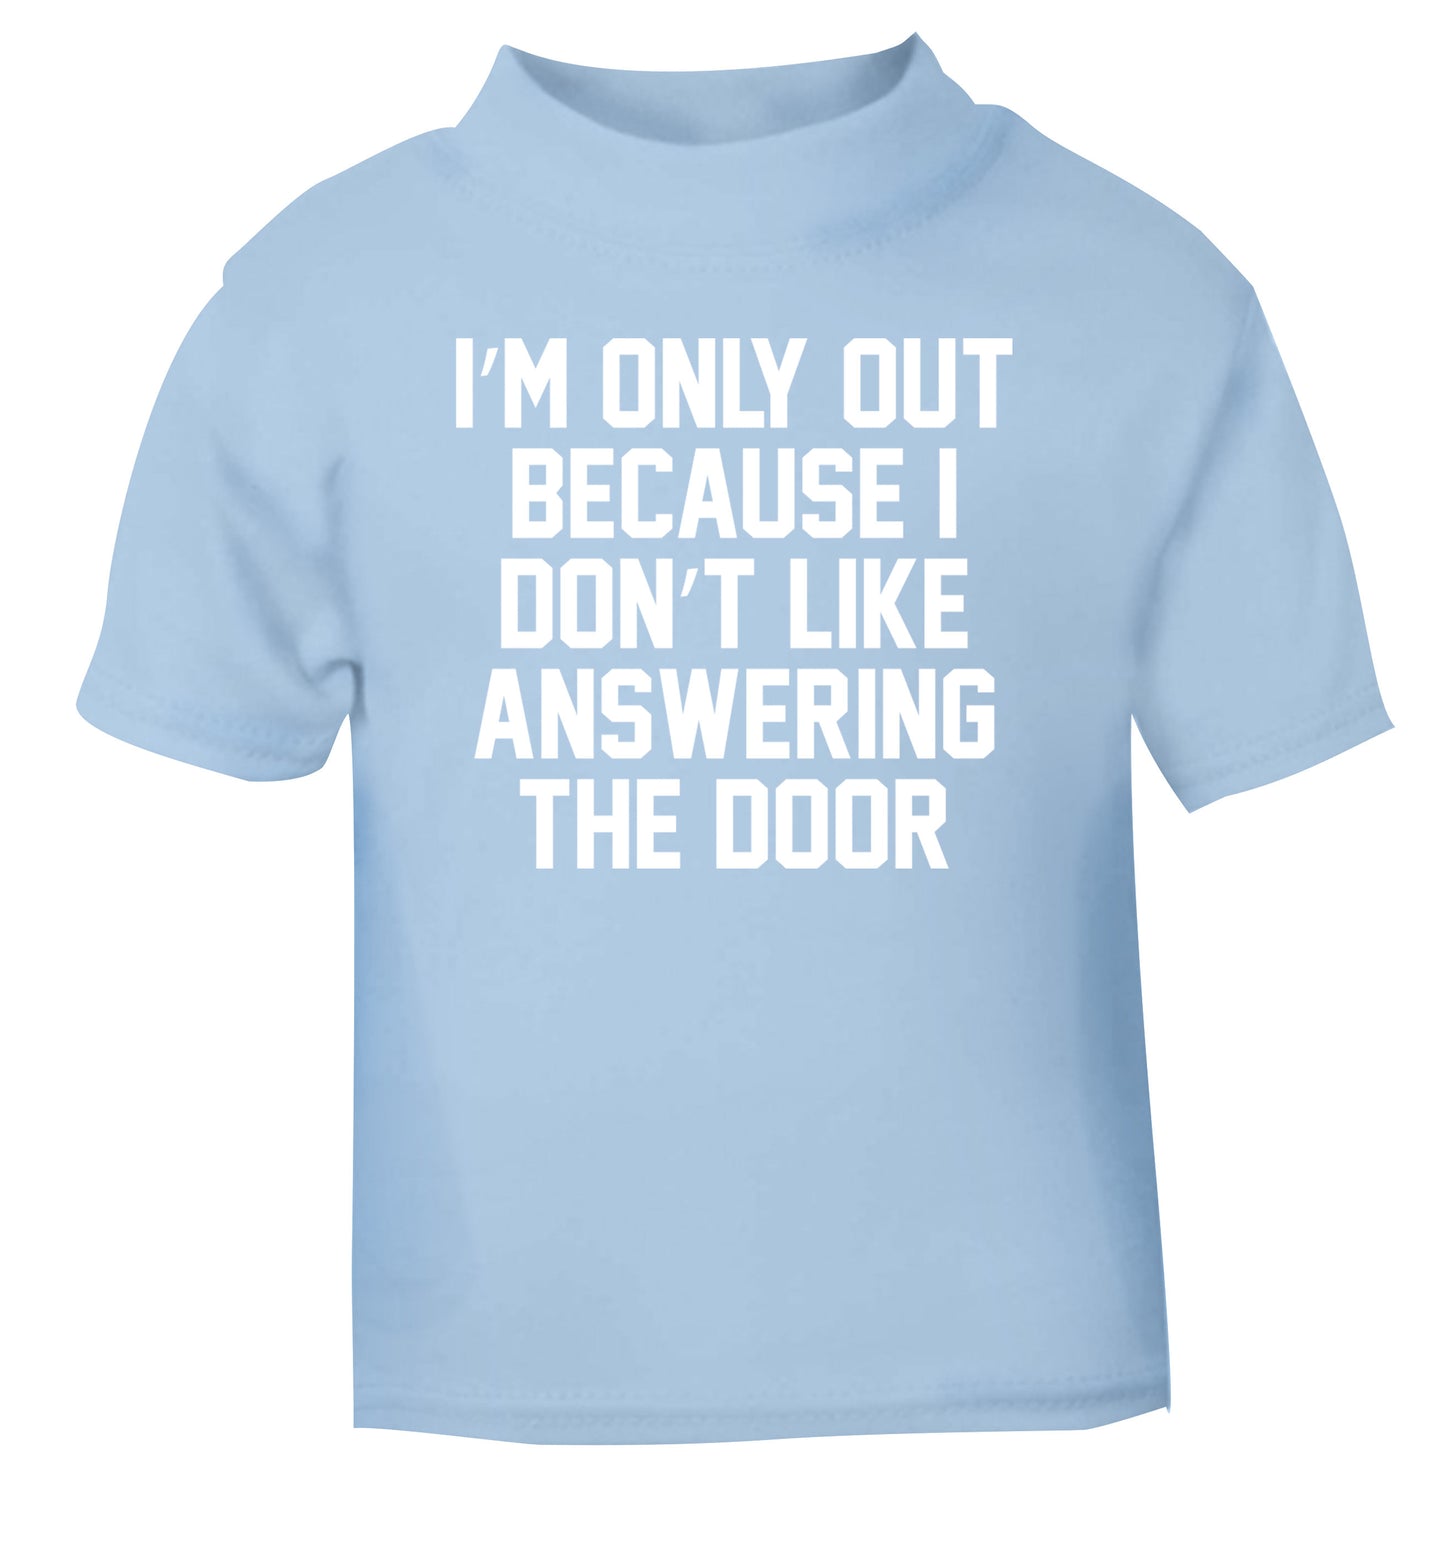 I'm only out because I don't like answering the door light blue Baby Toddler Tshirt 2 Years